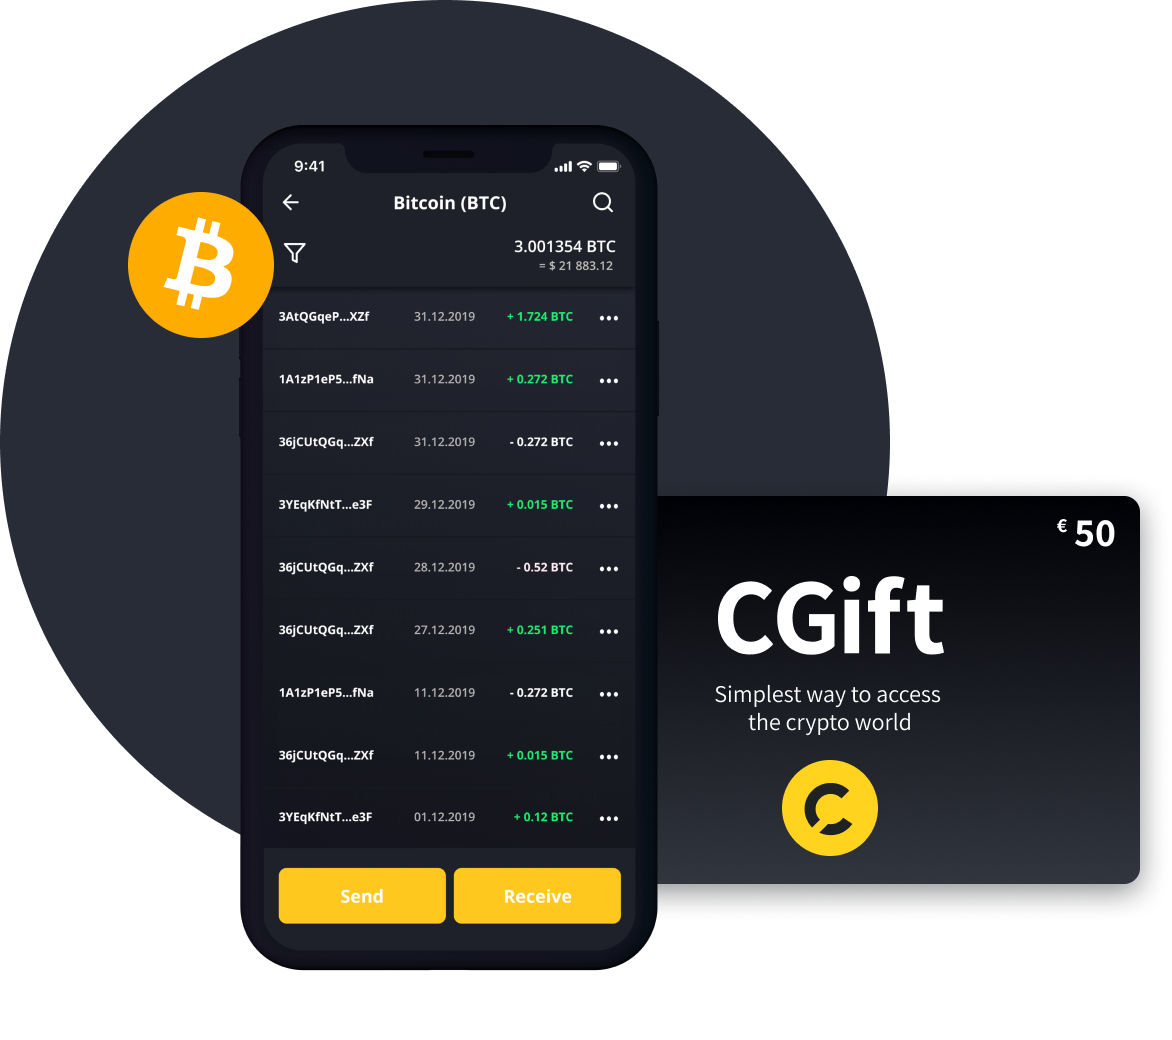 How To Buy Gift Cards Or Top Up Your Mobile With Crypto And CoinsBee